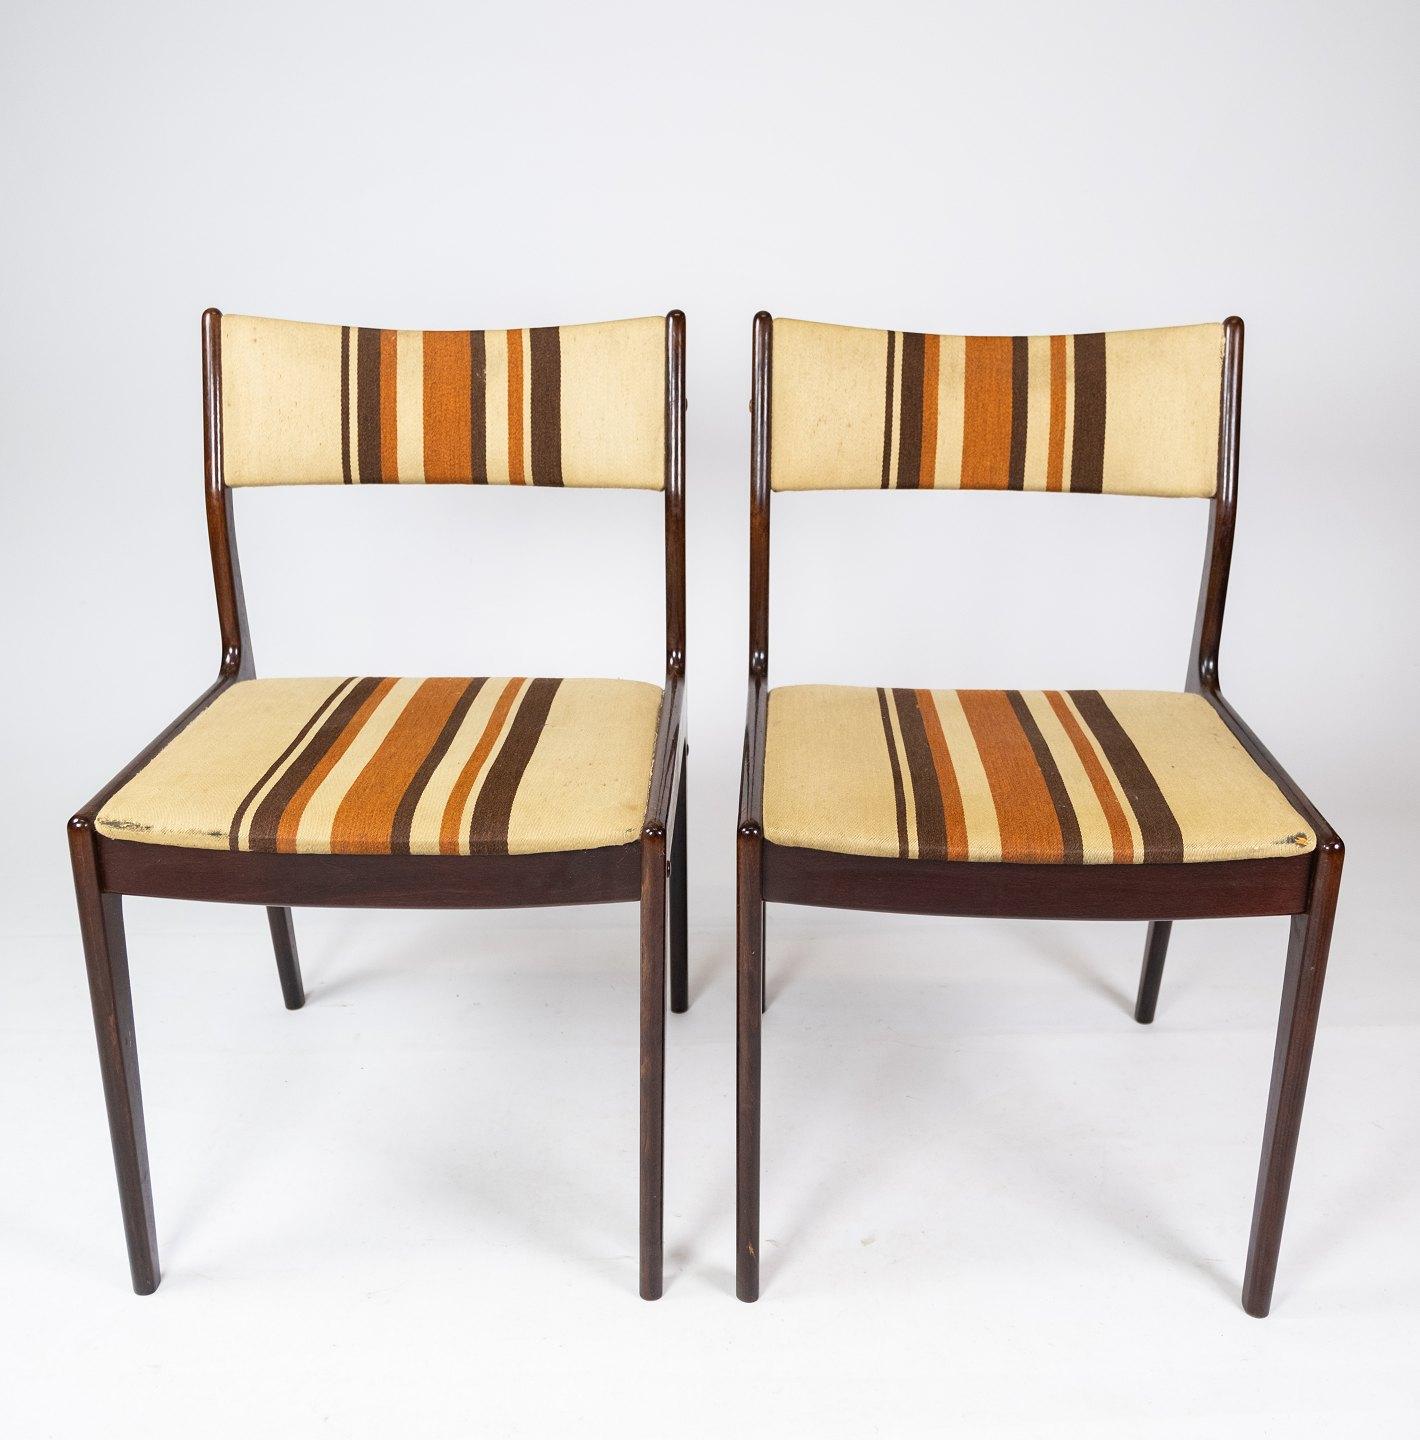 A pair of chairs in dark wood upholstered with light striped fabric of Danish design and Uldum Furniture factory from the 1960s. The chairs are in great vintage condition.
 